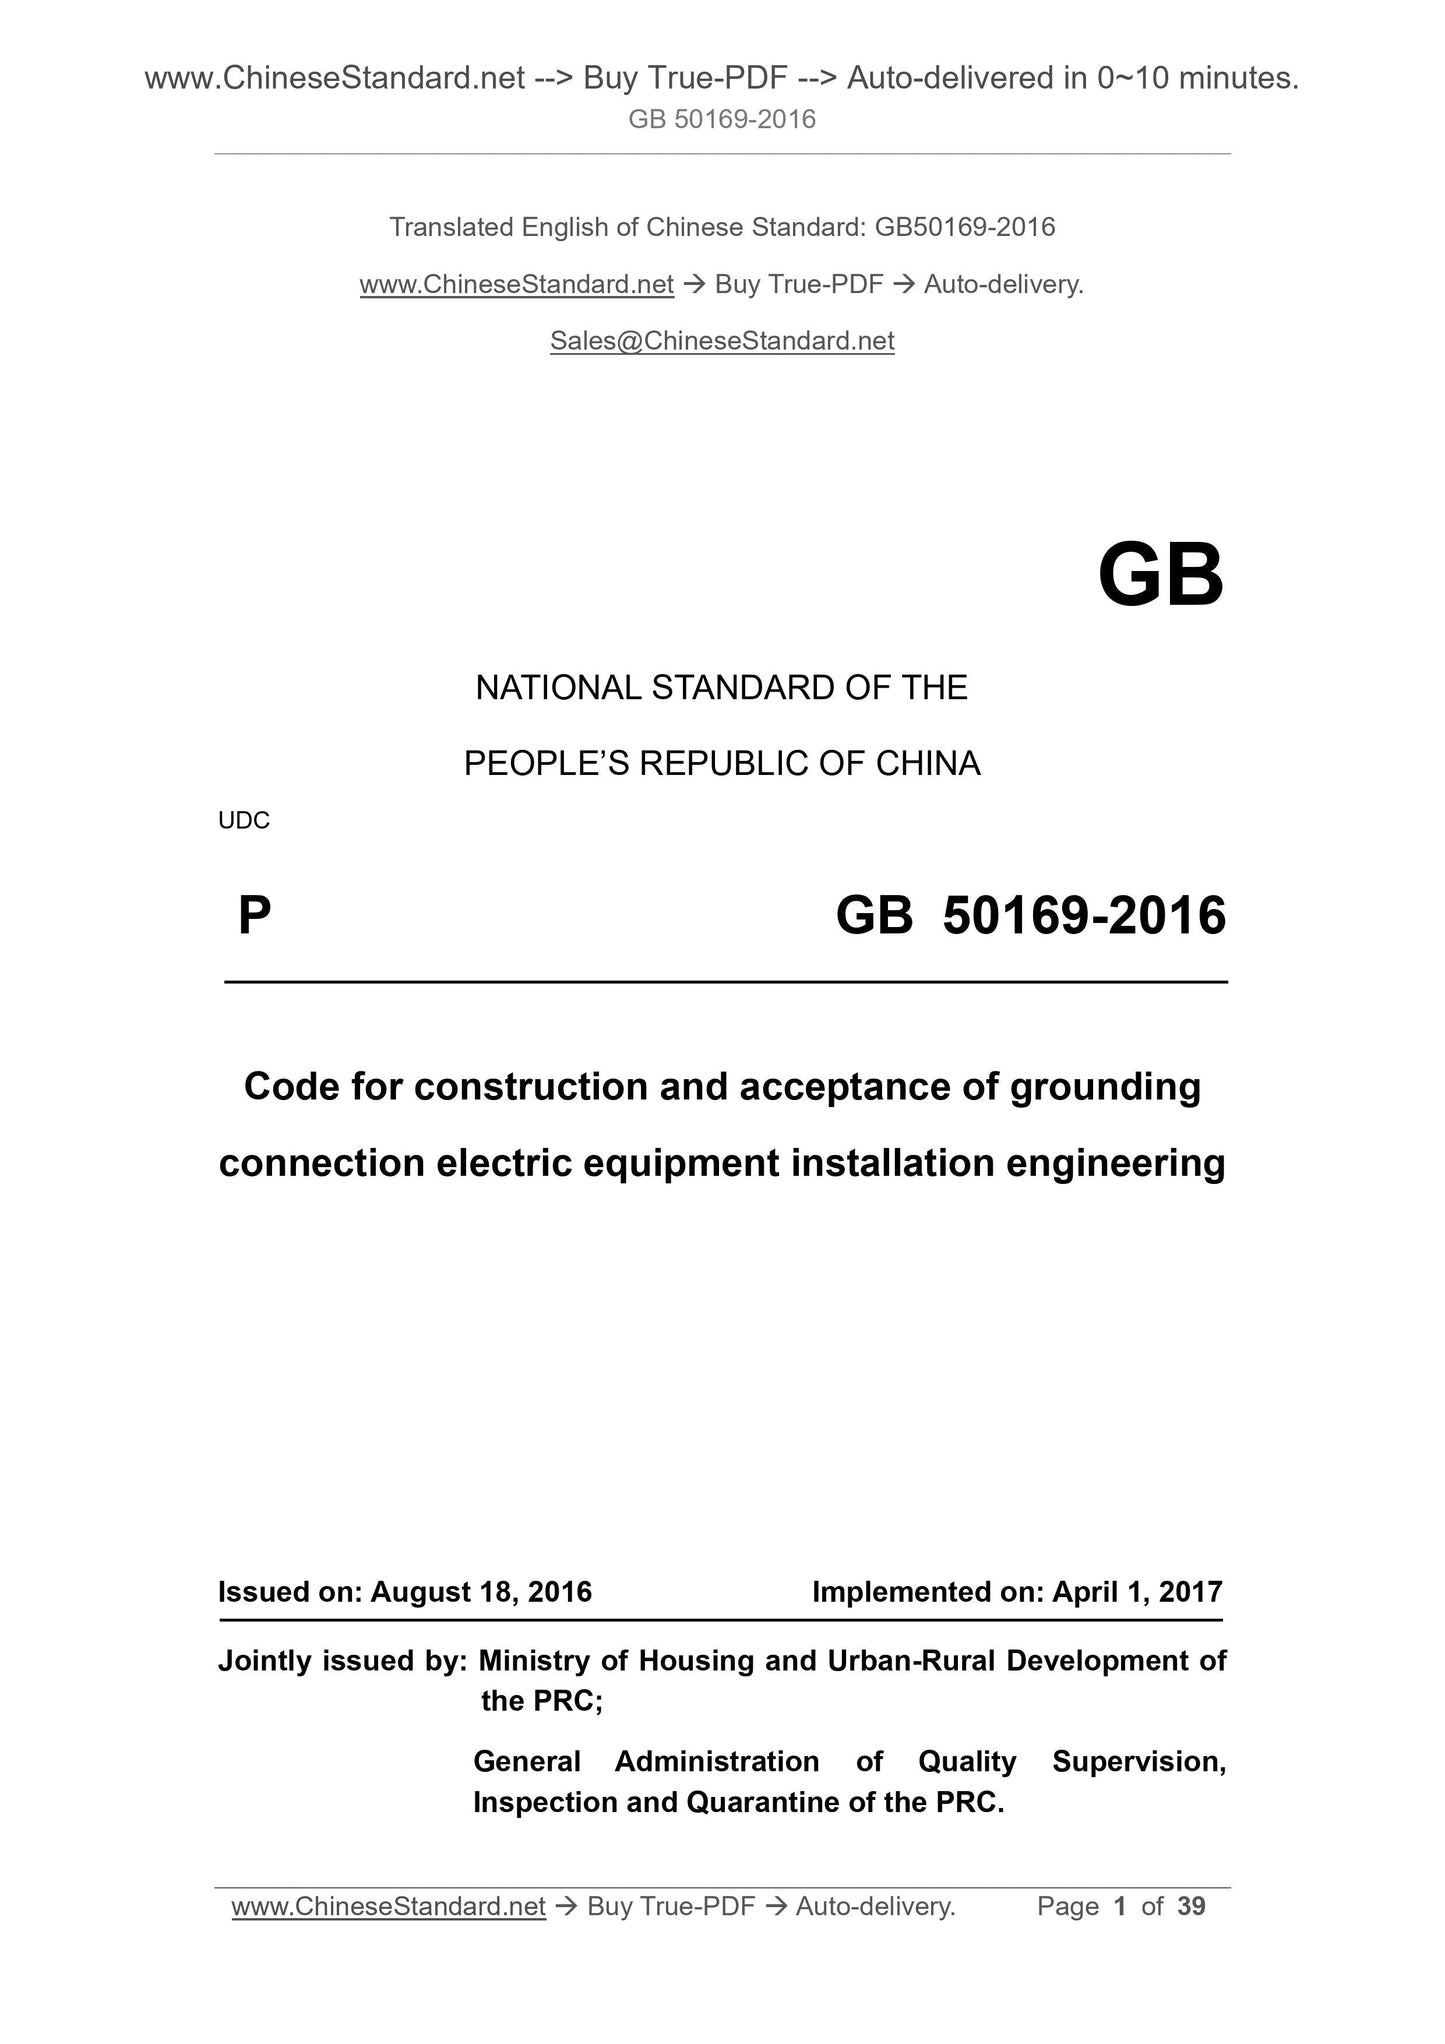 GB 50169-2016 Page 1